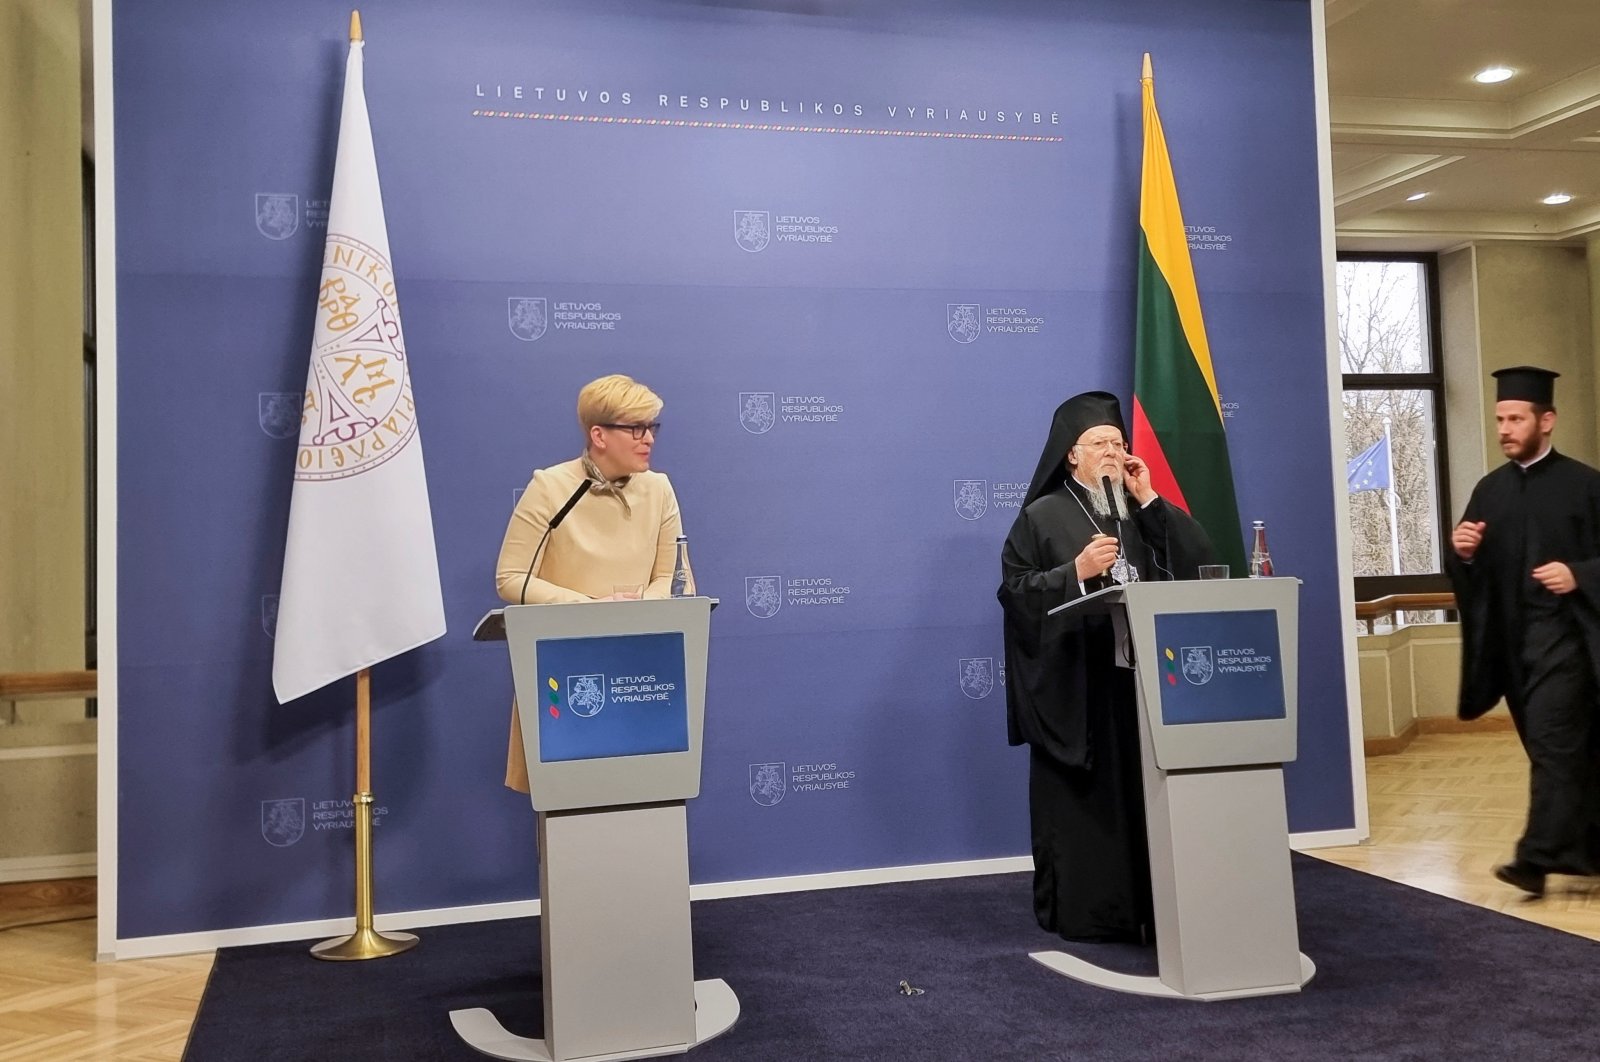 Lithuanian Prime Minister Ingrida Simonyte (L) and Patriarch Bartholomew attend a news conference, in Vilnius, Lithuania, March 21, 2023. (Reuters Photo)